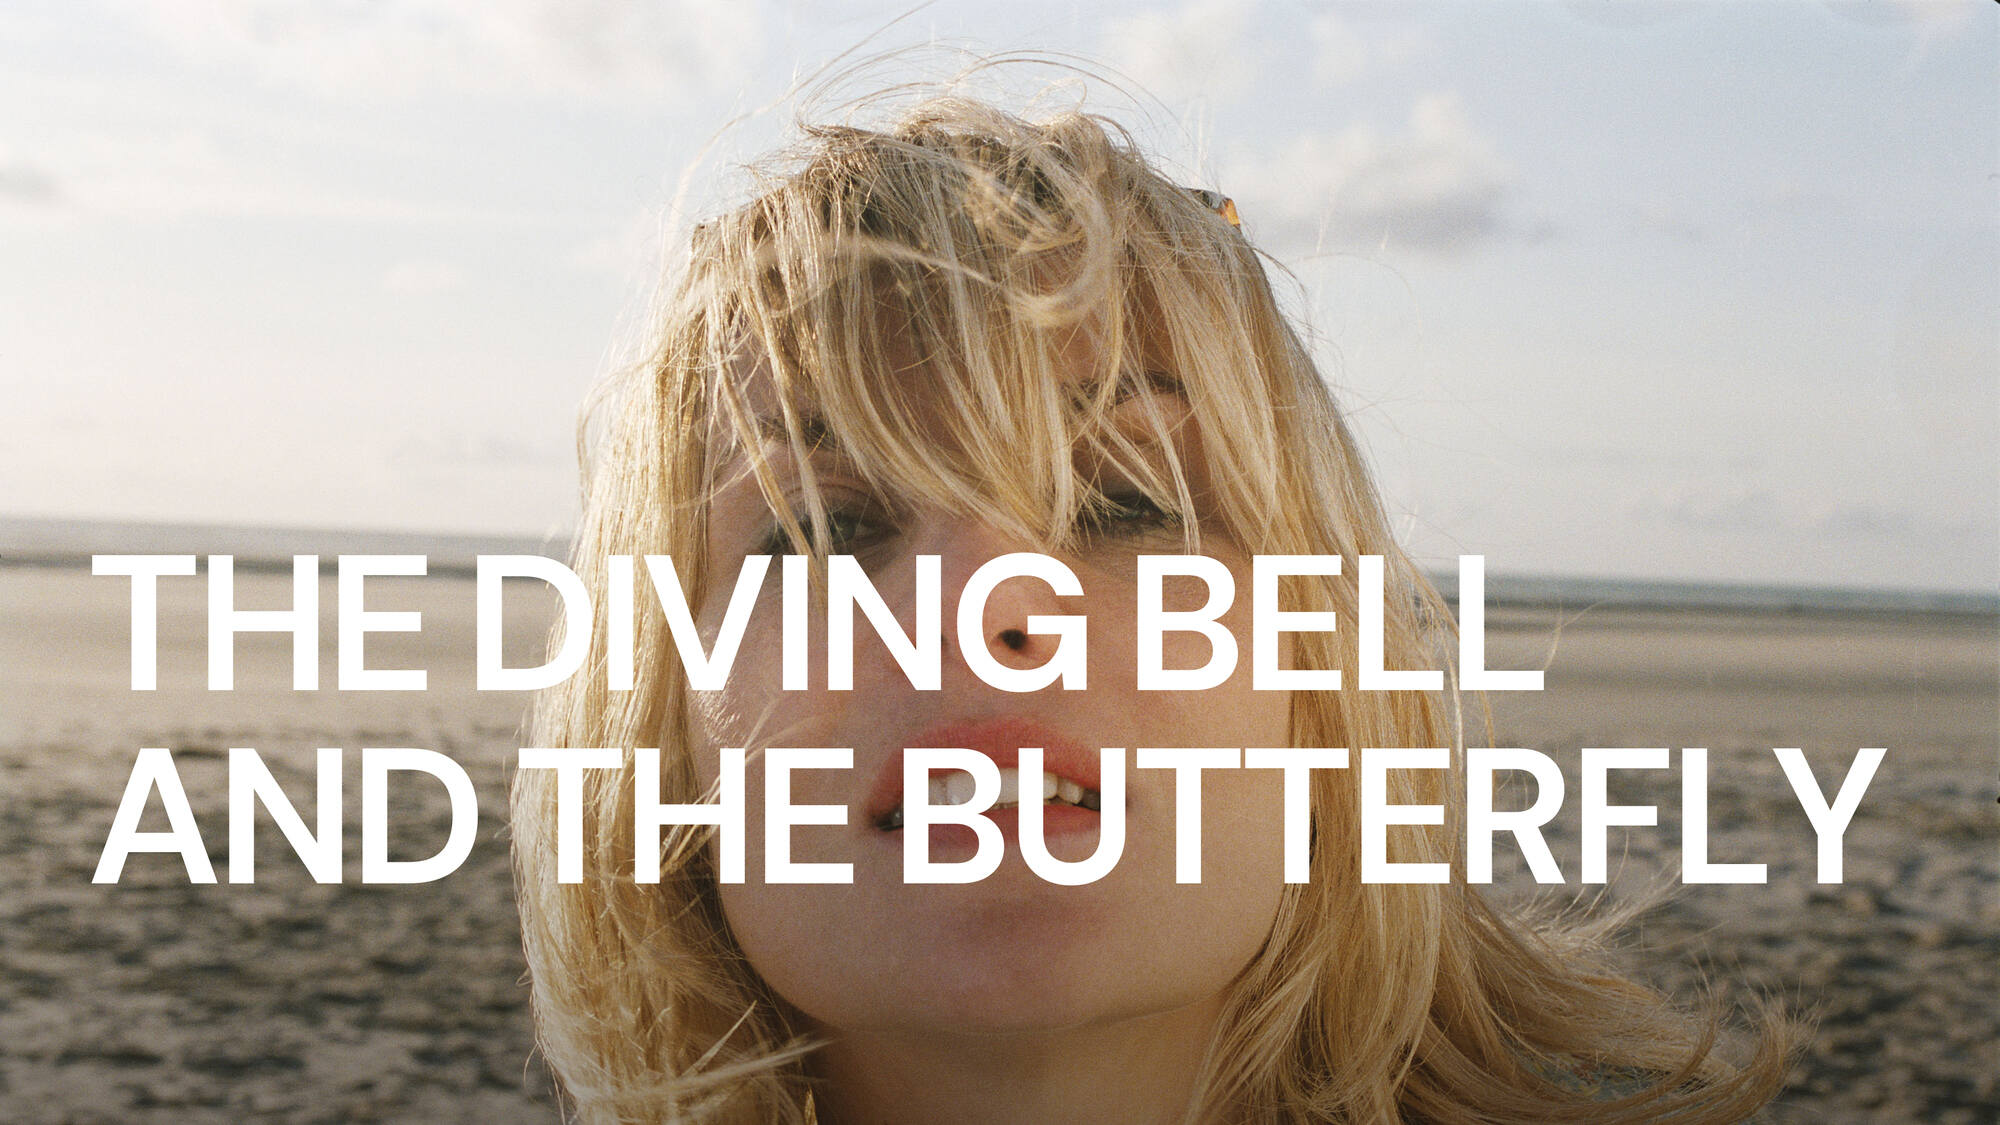 44-facts-about-the-movie-the-diving-bell-and-the-butterfly